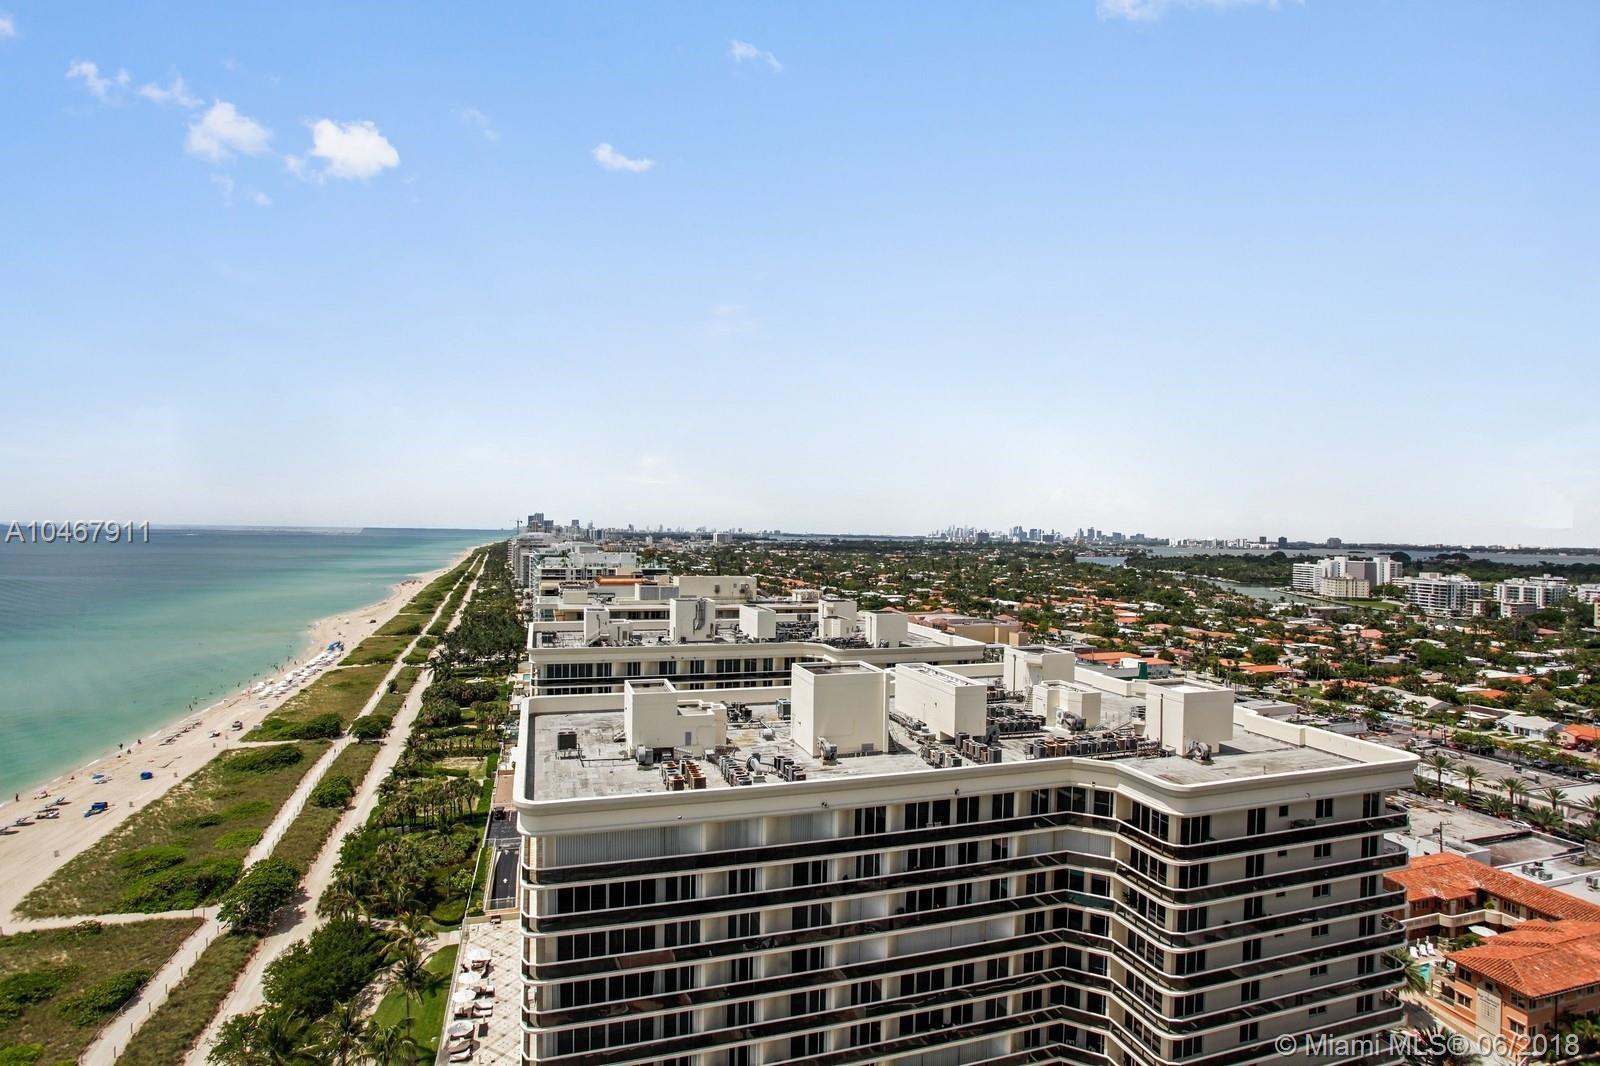 9601 Collins Ave #PH205, Bal Harbour | MLS# A10467911 | Closed Sale